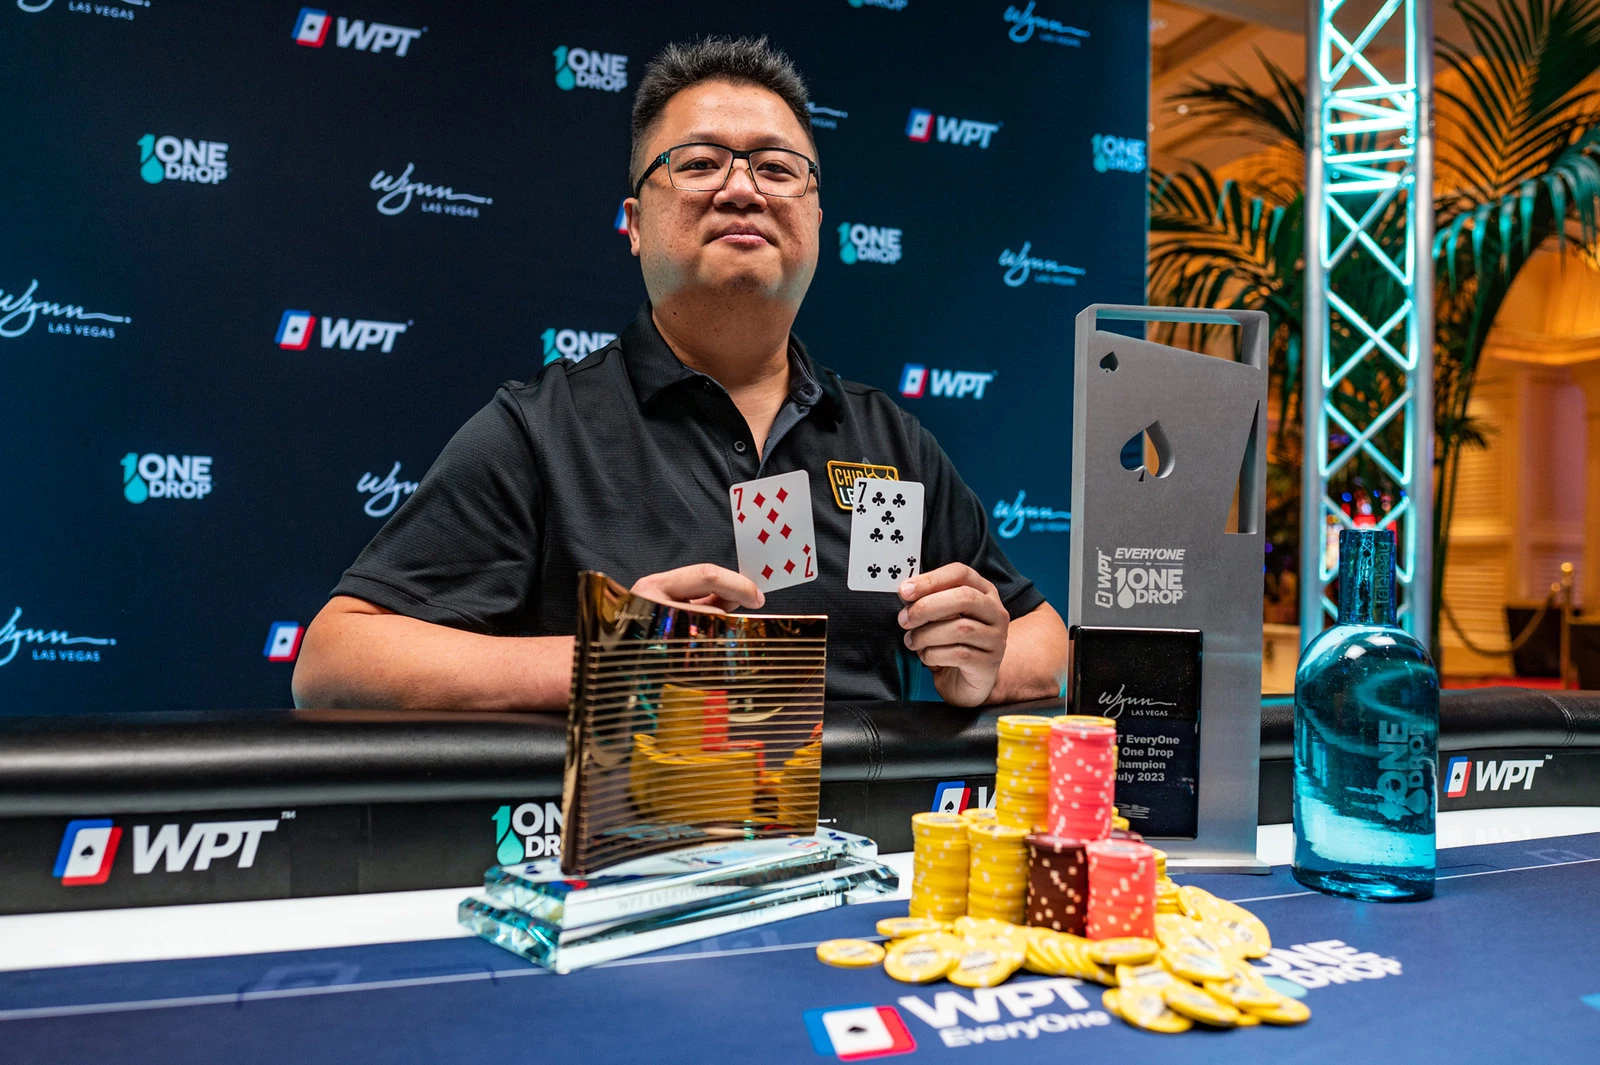 Bin Weng’s Spectacular WPT Streak Continues with EveryOne for One Drop Win